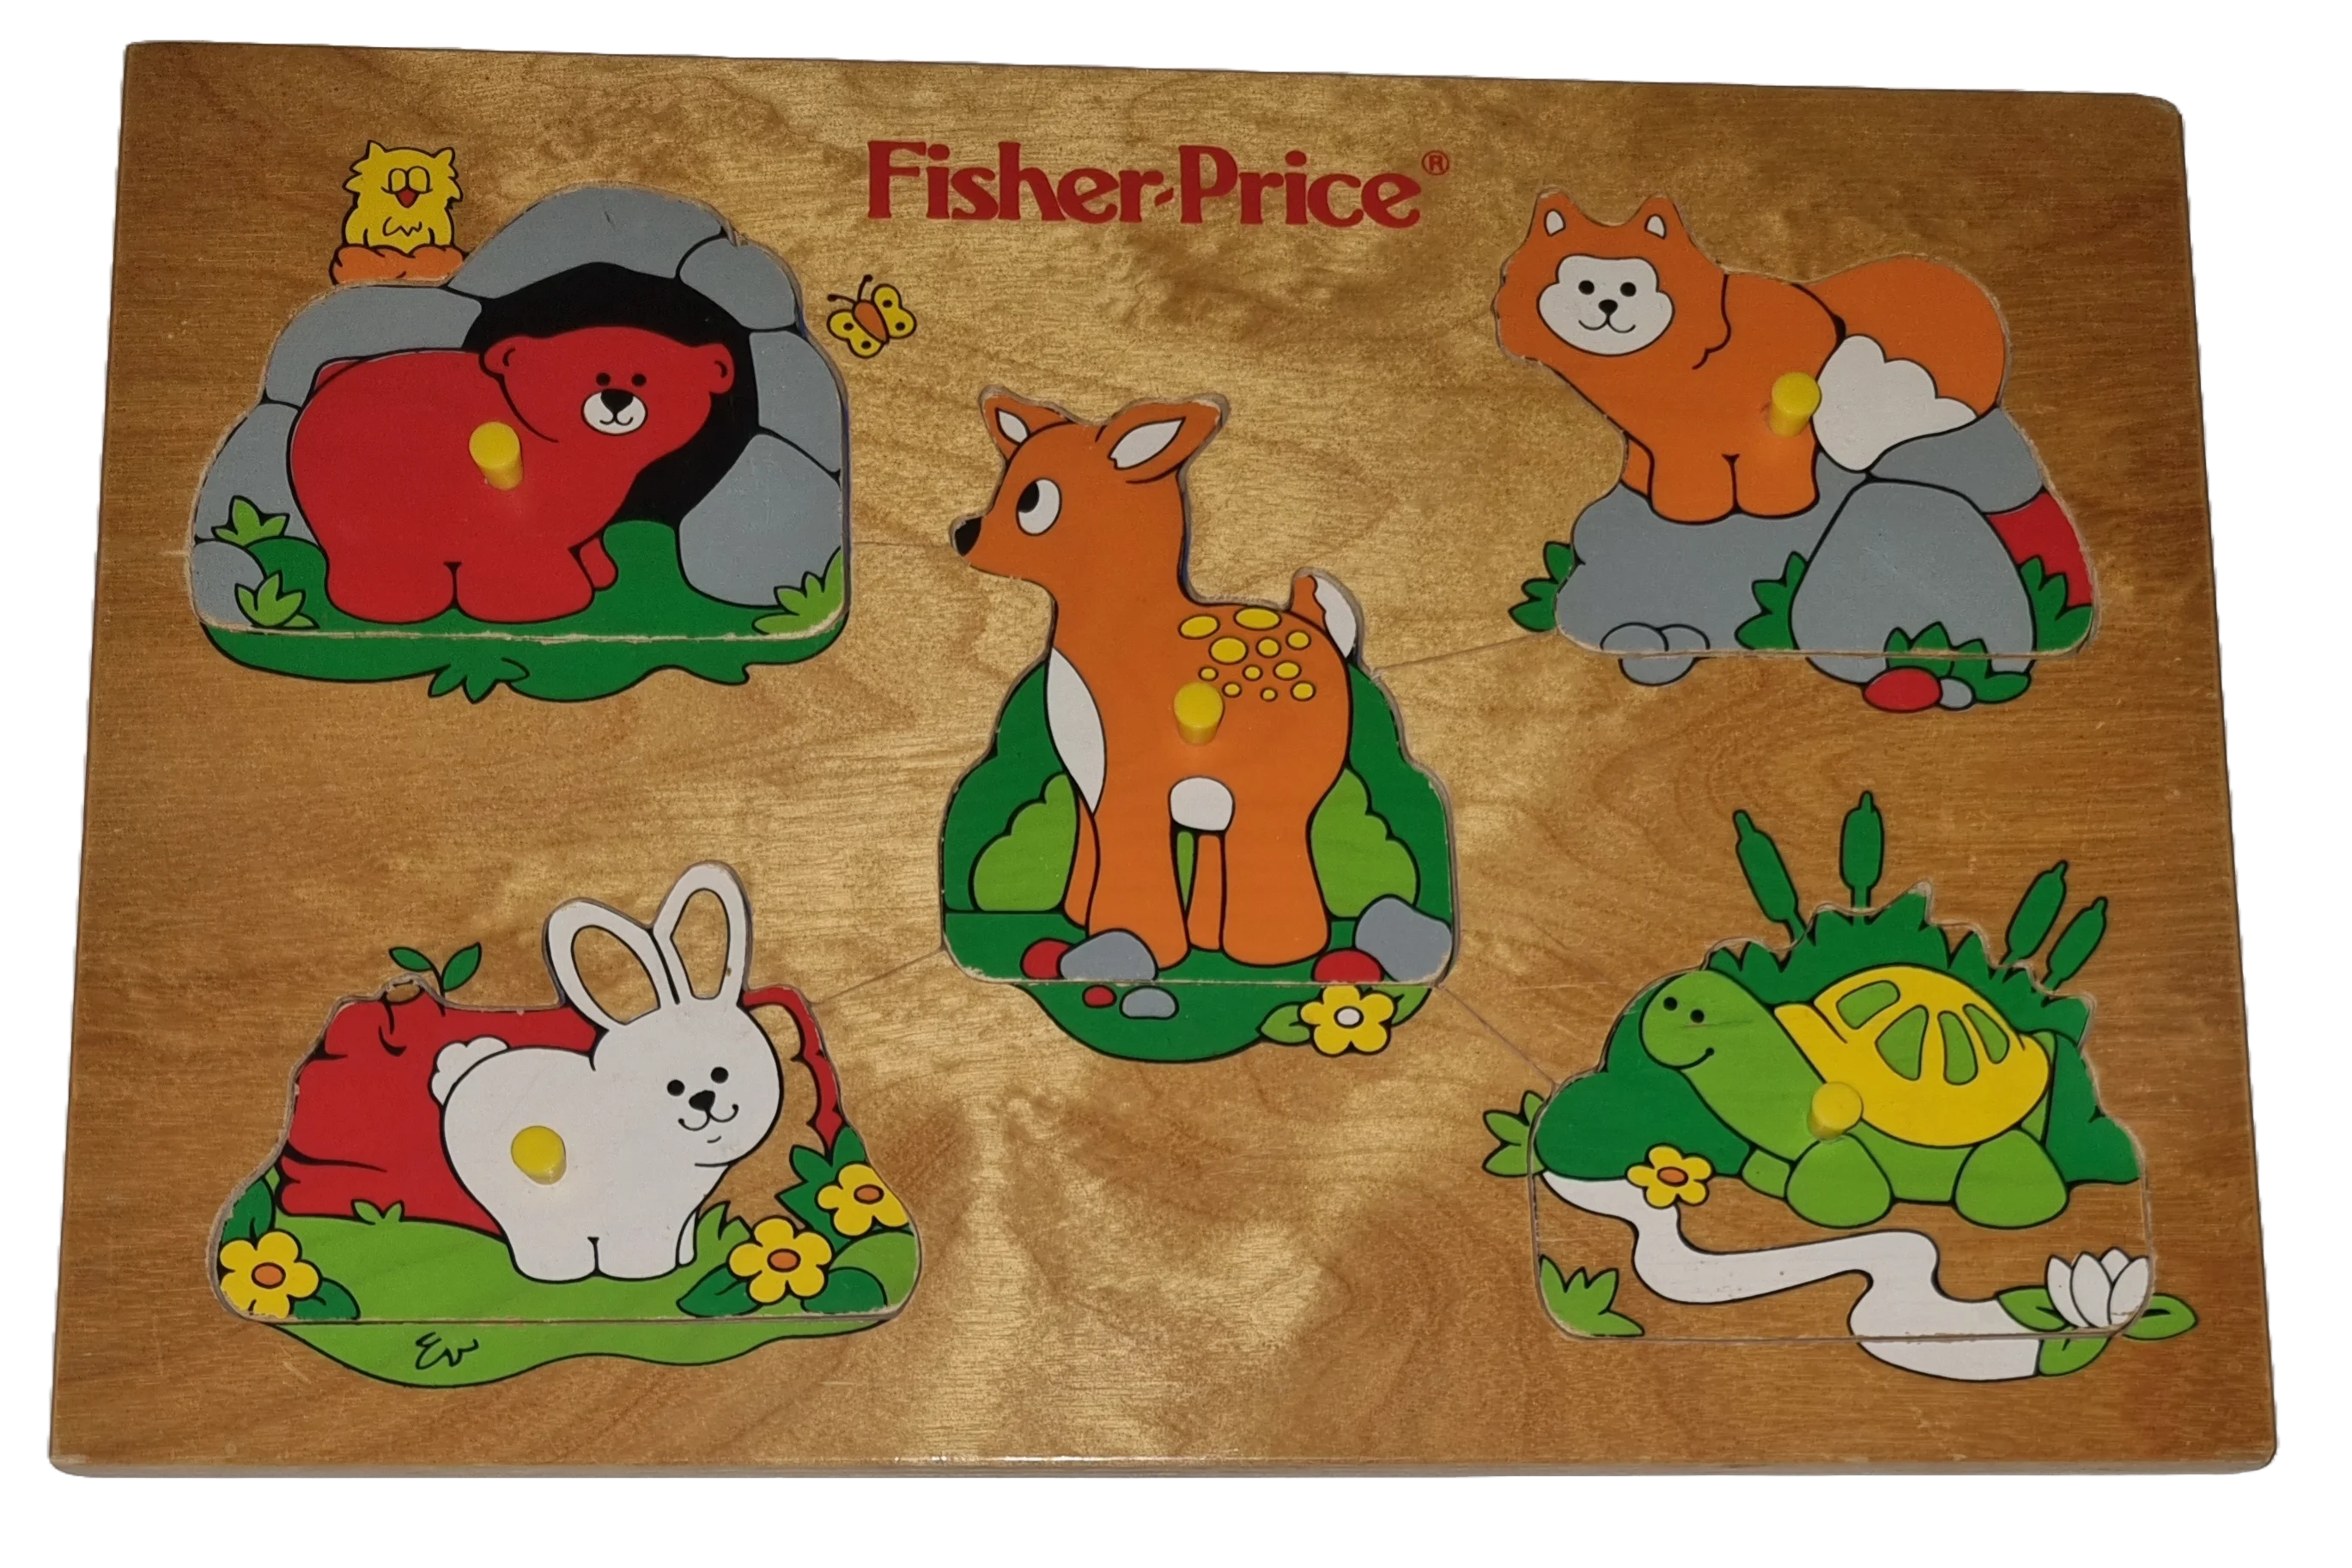 Fisher-Price Holzpuzzle mit Griff Tiere 5 Teile